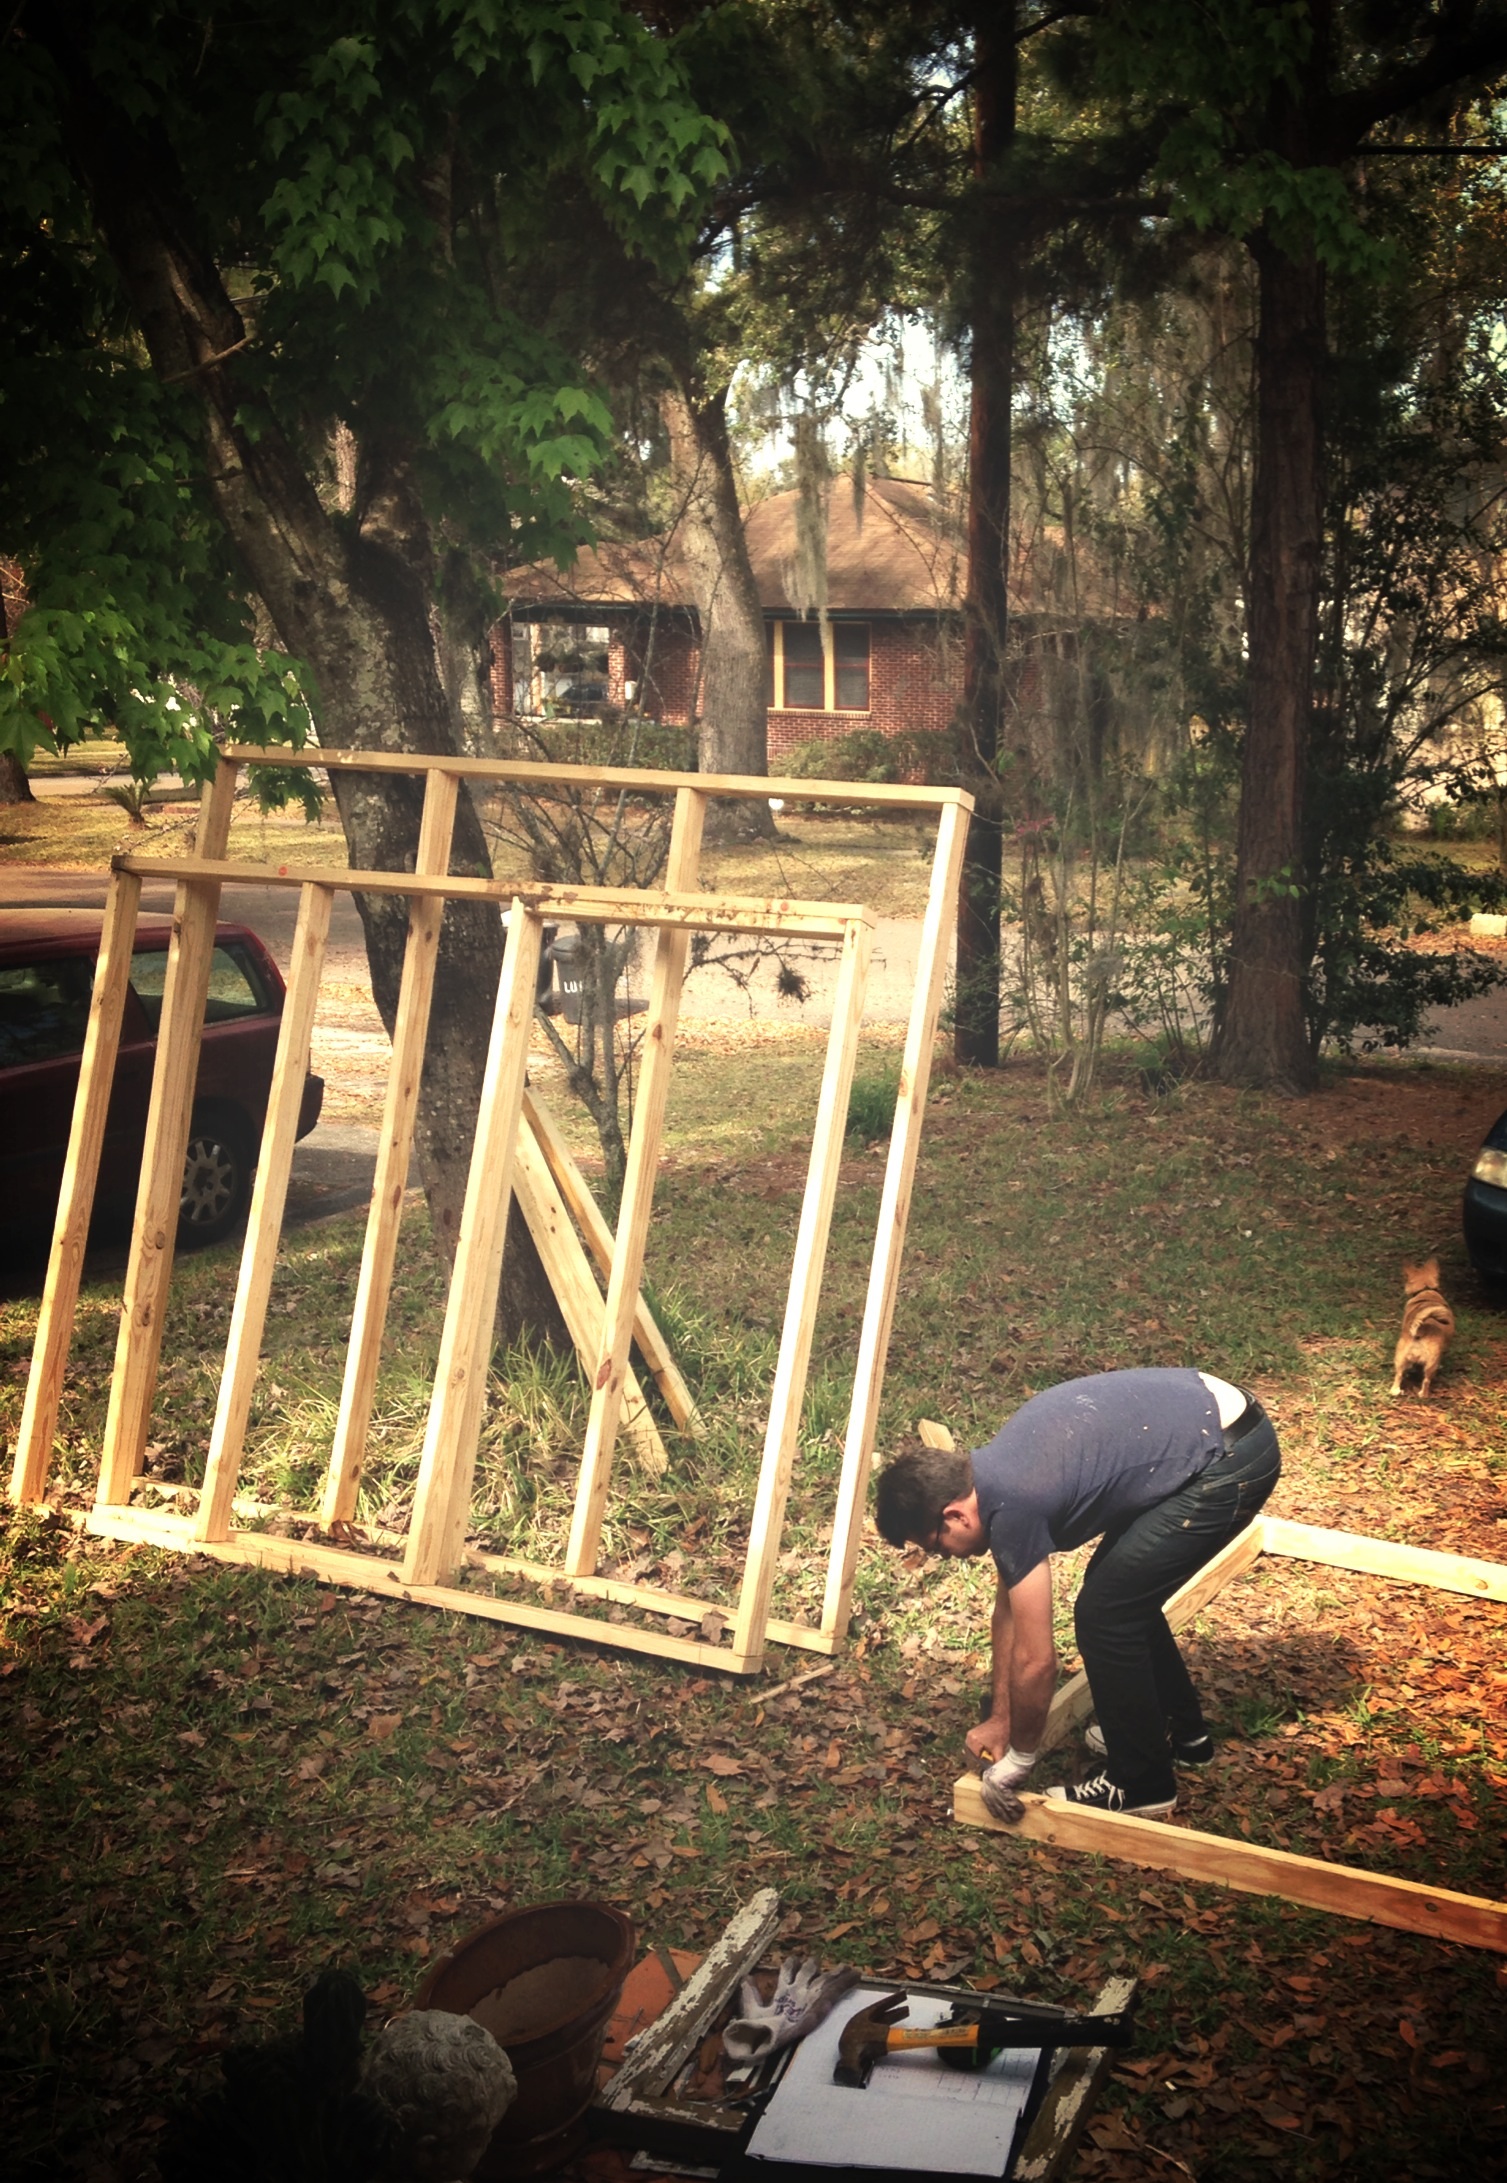 Building the walls for the run.